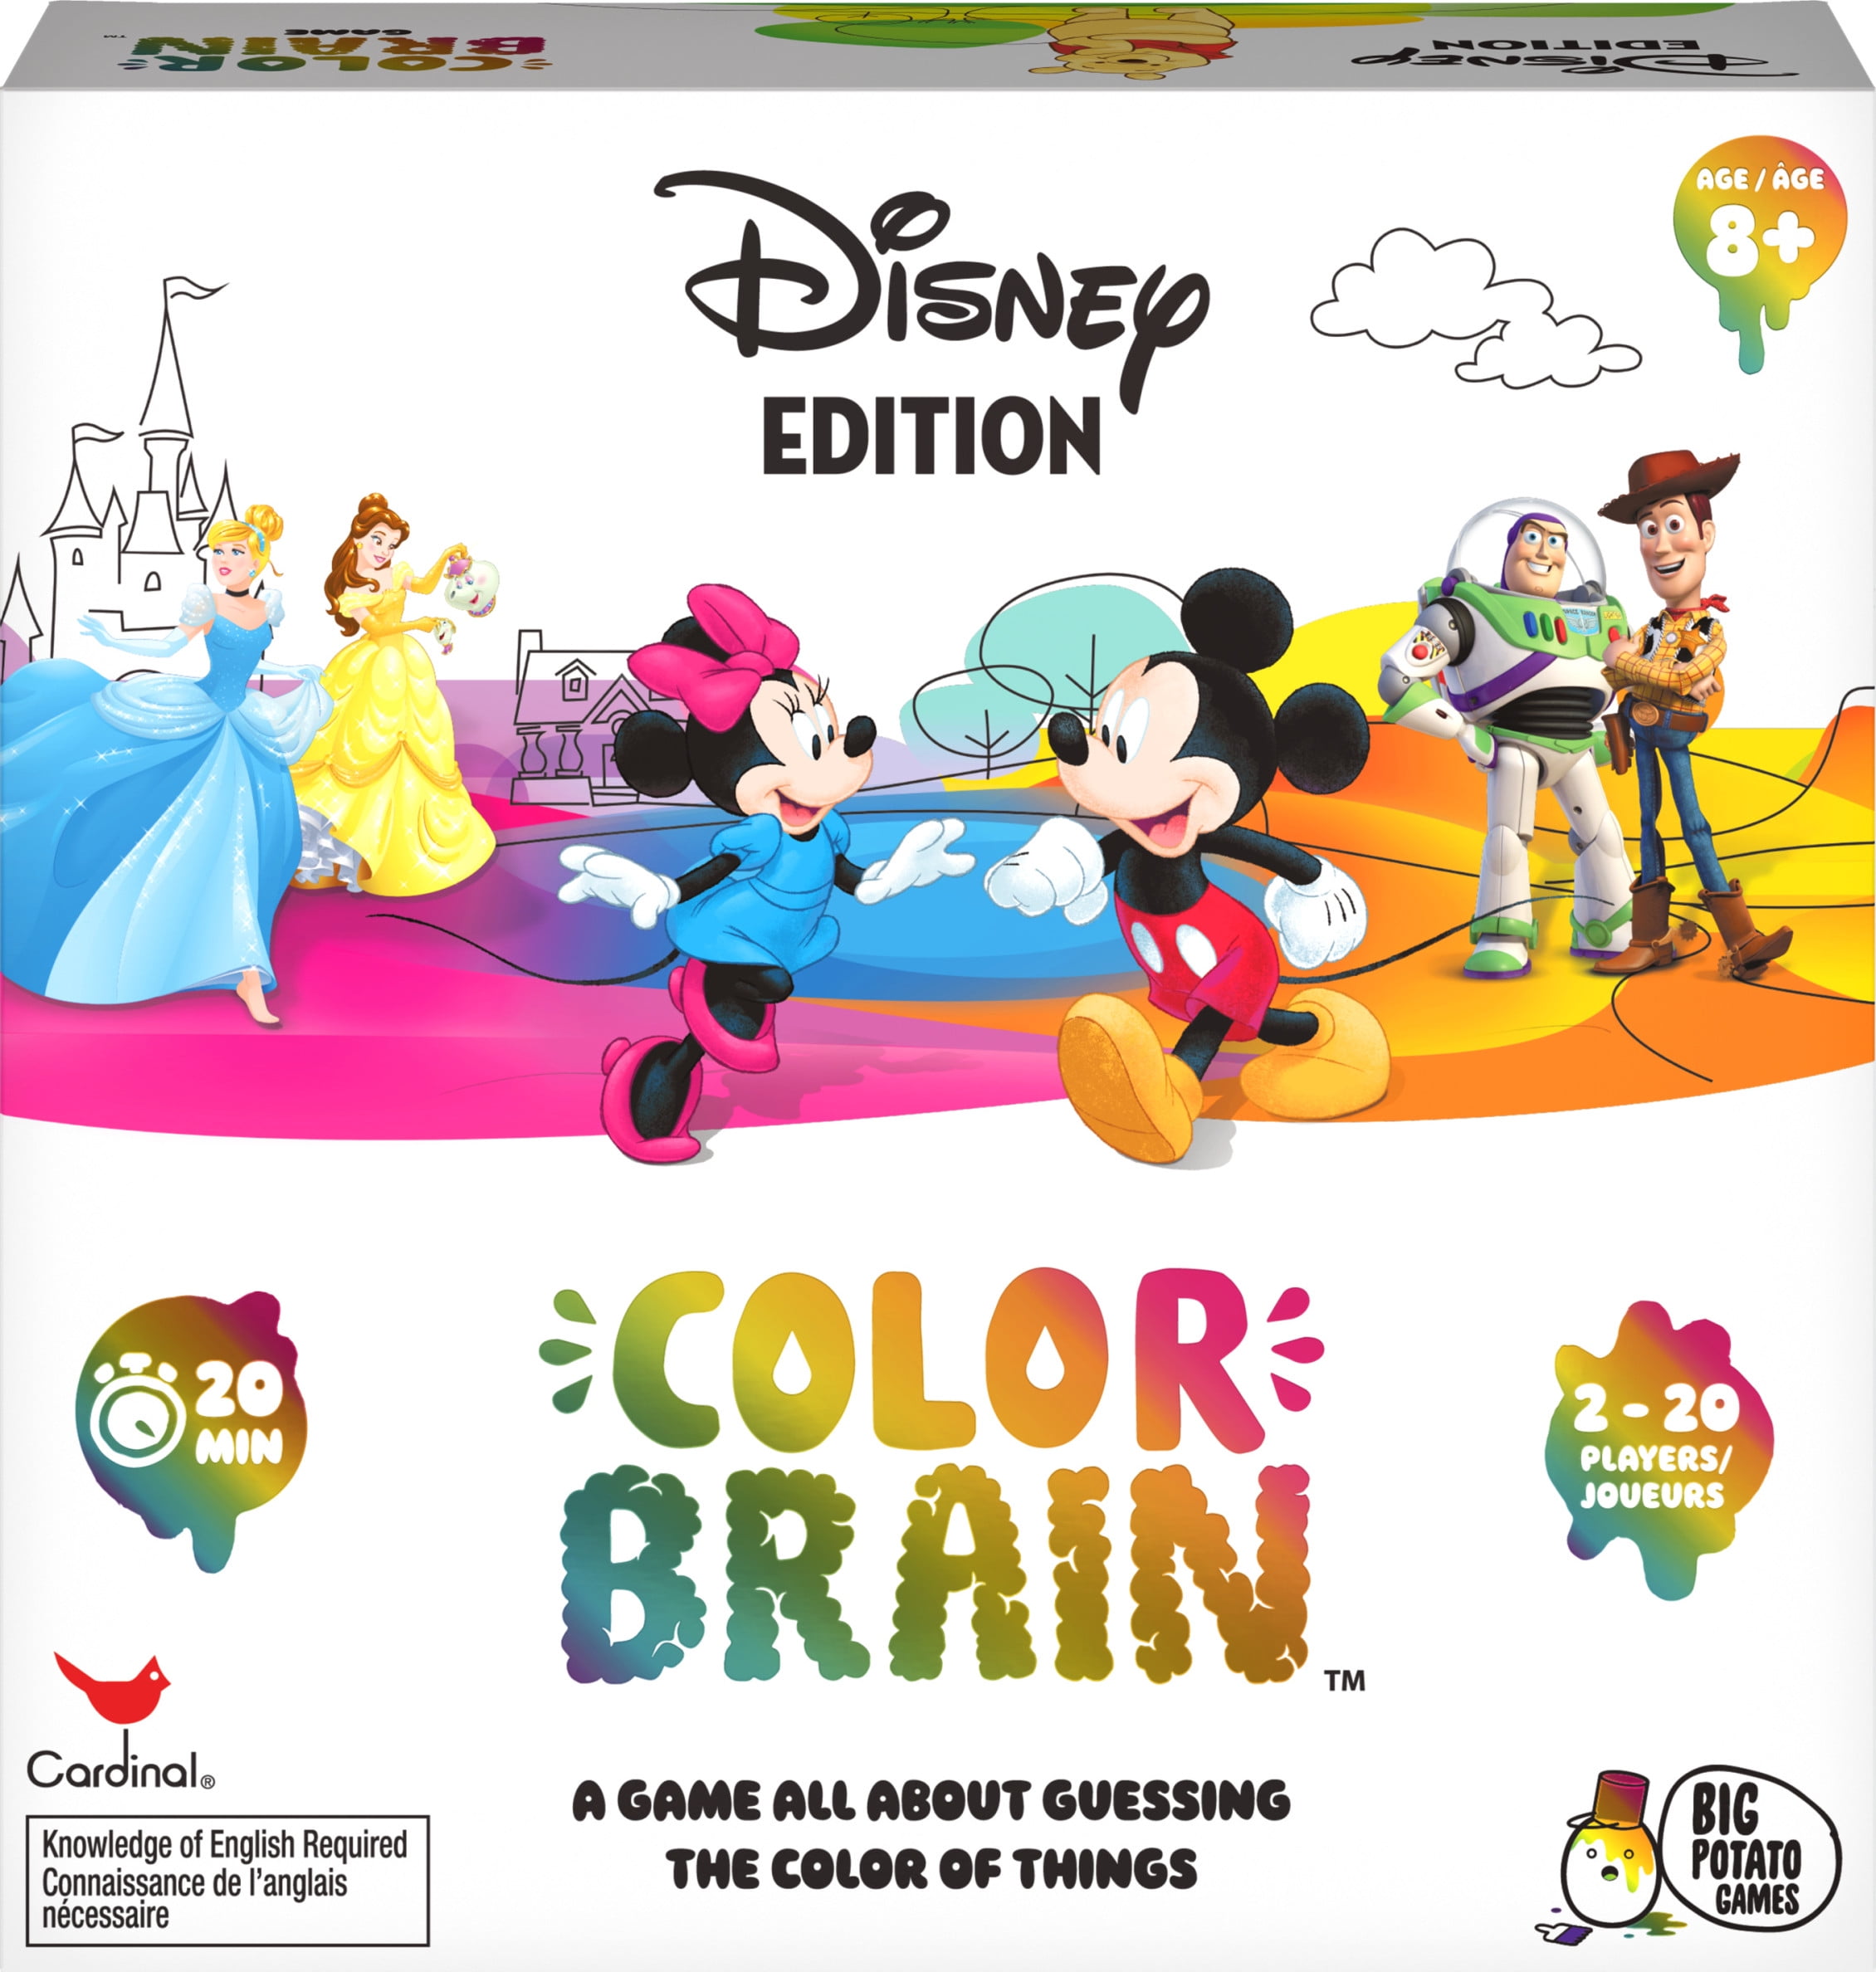 Details about   Pictopia Family Trivia Game Disney Edition Ultimate Entarteiment Family.New